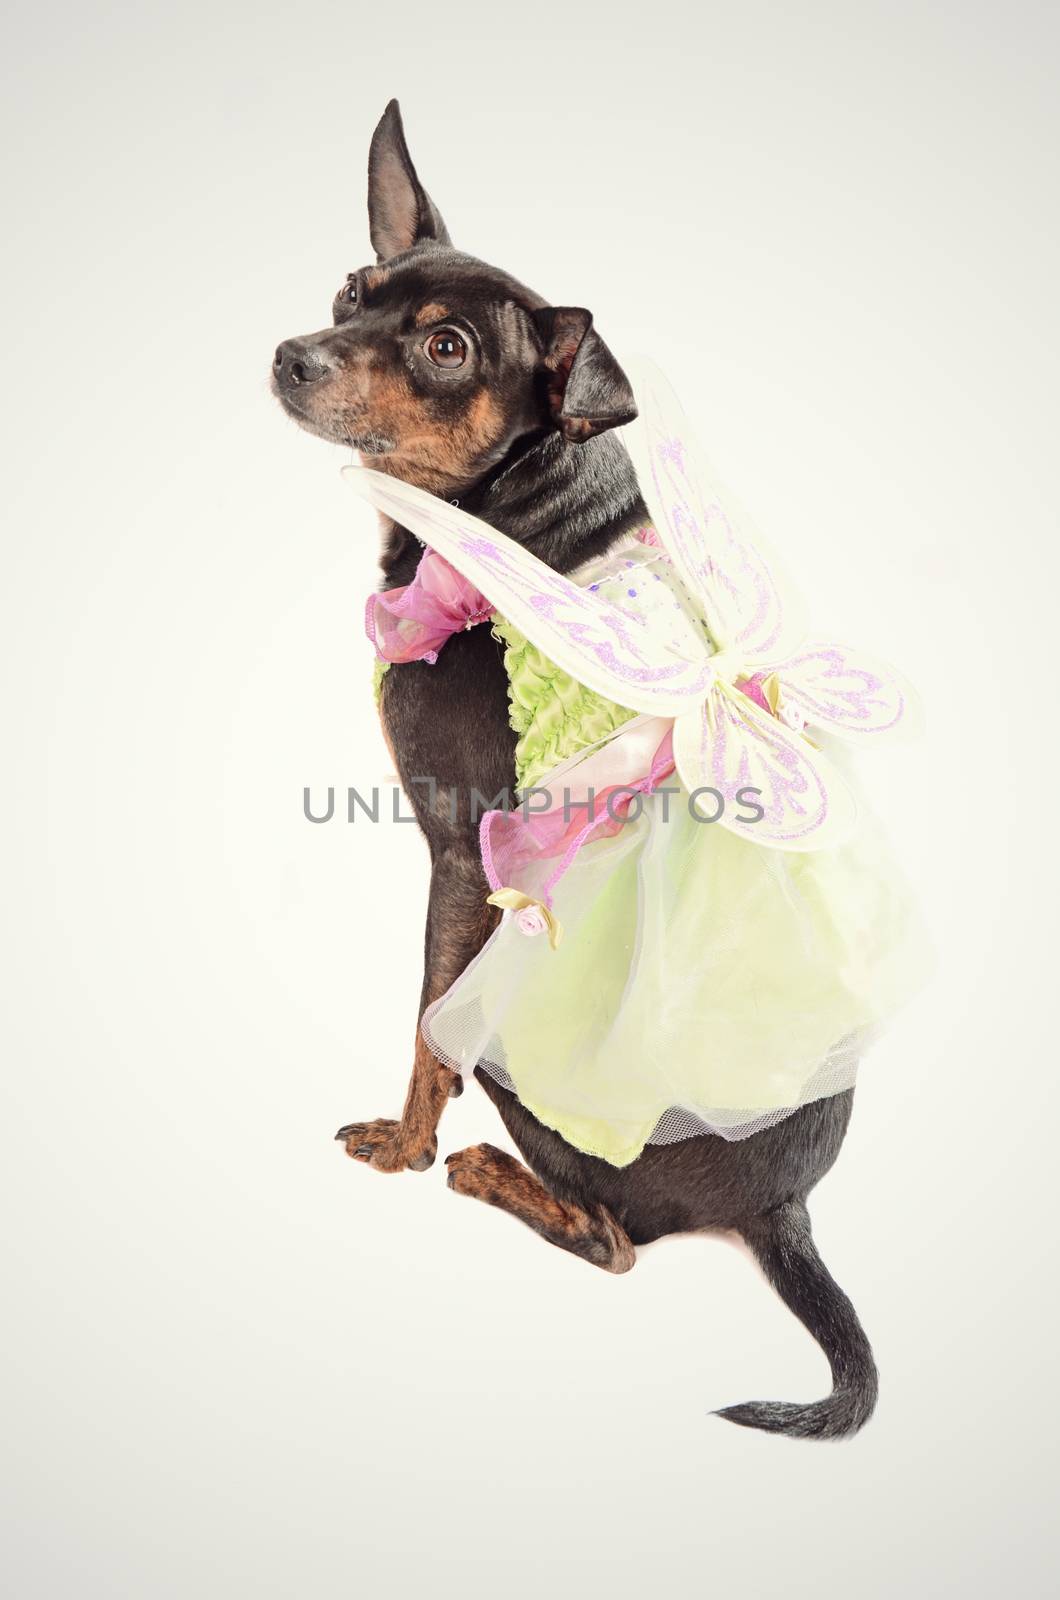 Chihuahua dog wearing a fairy costume and sitting ona clean background with a yellow-green hue